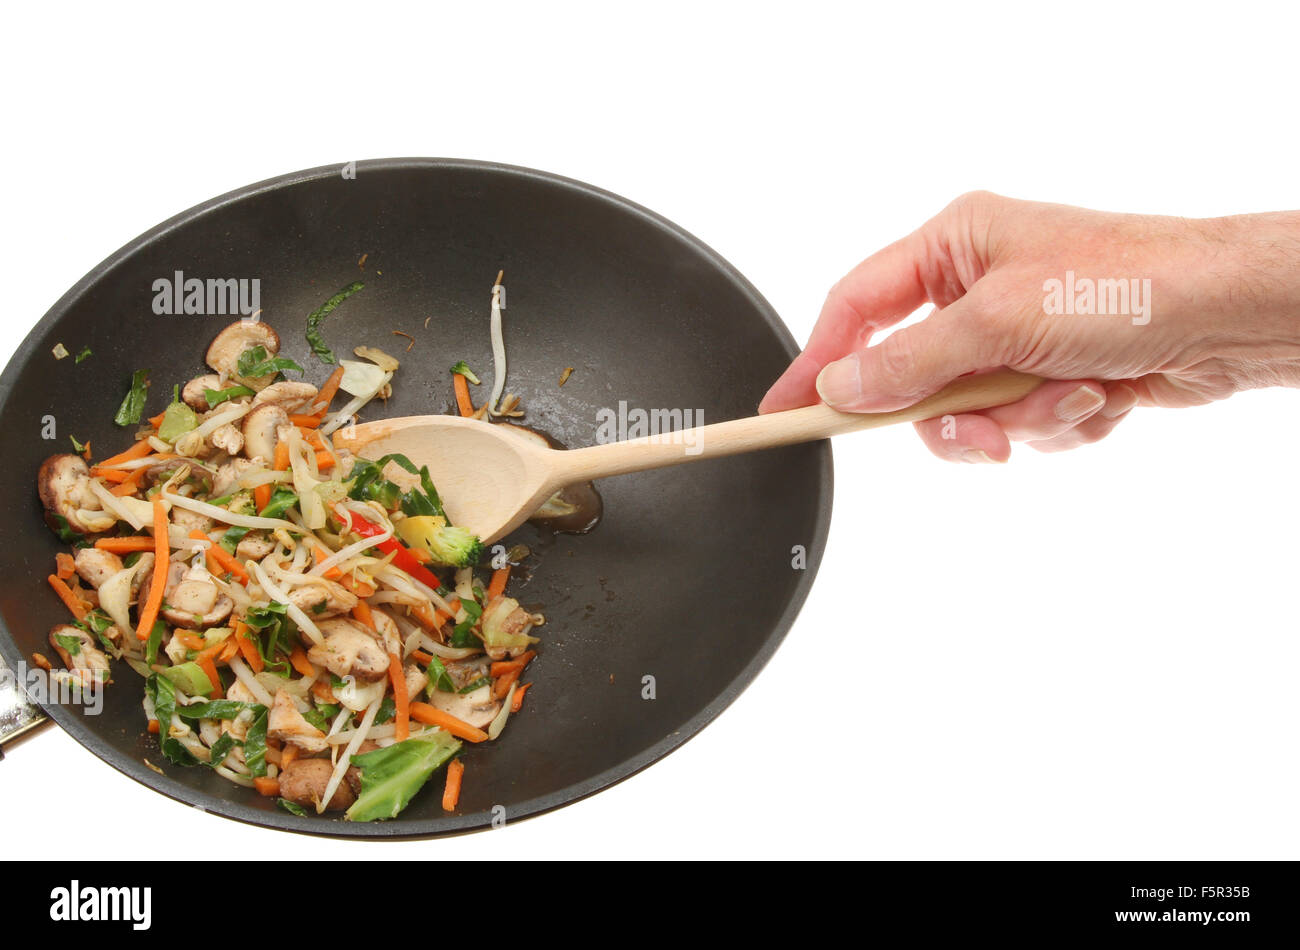 Hand with wooden spoon stirring chicken and stir fry vegetables in a wok against a white background Stock Photo